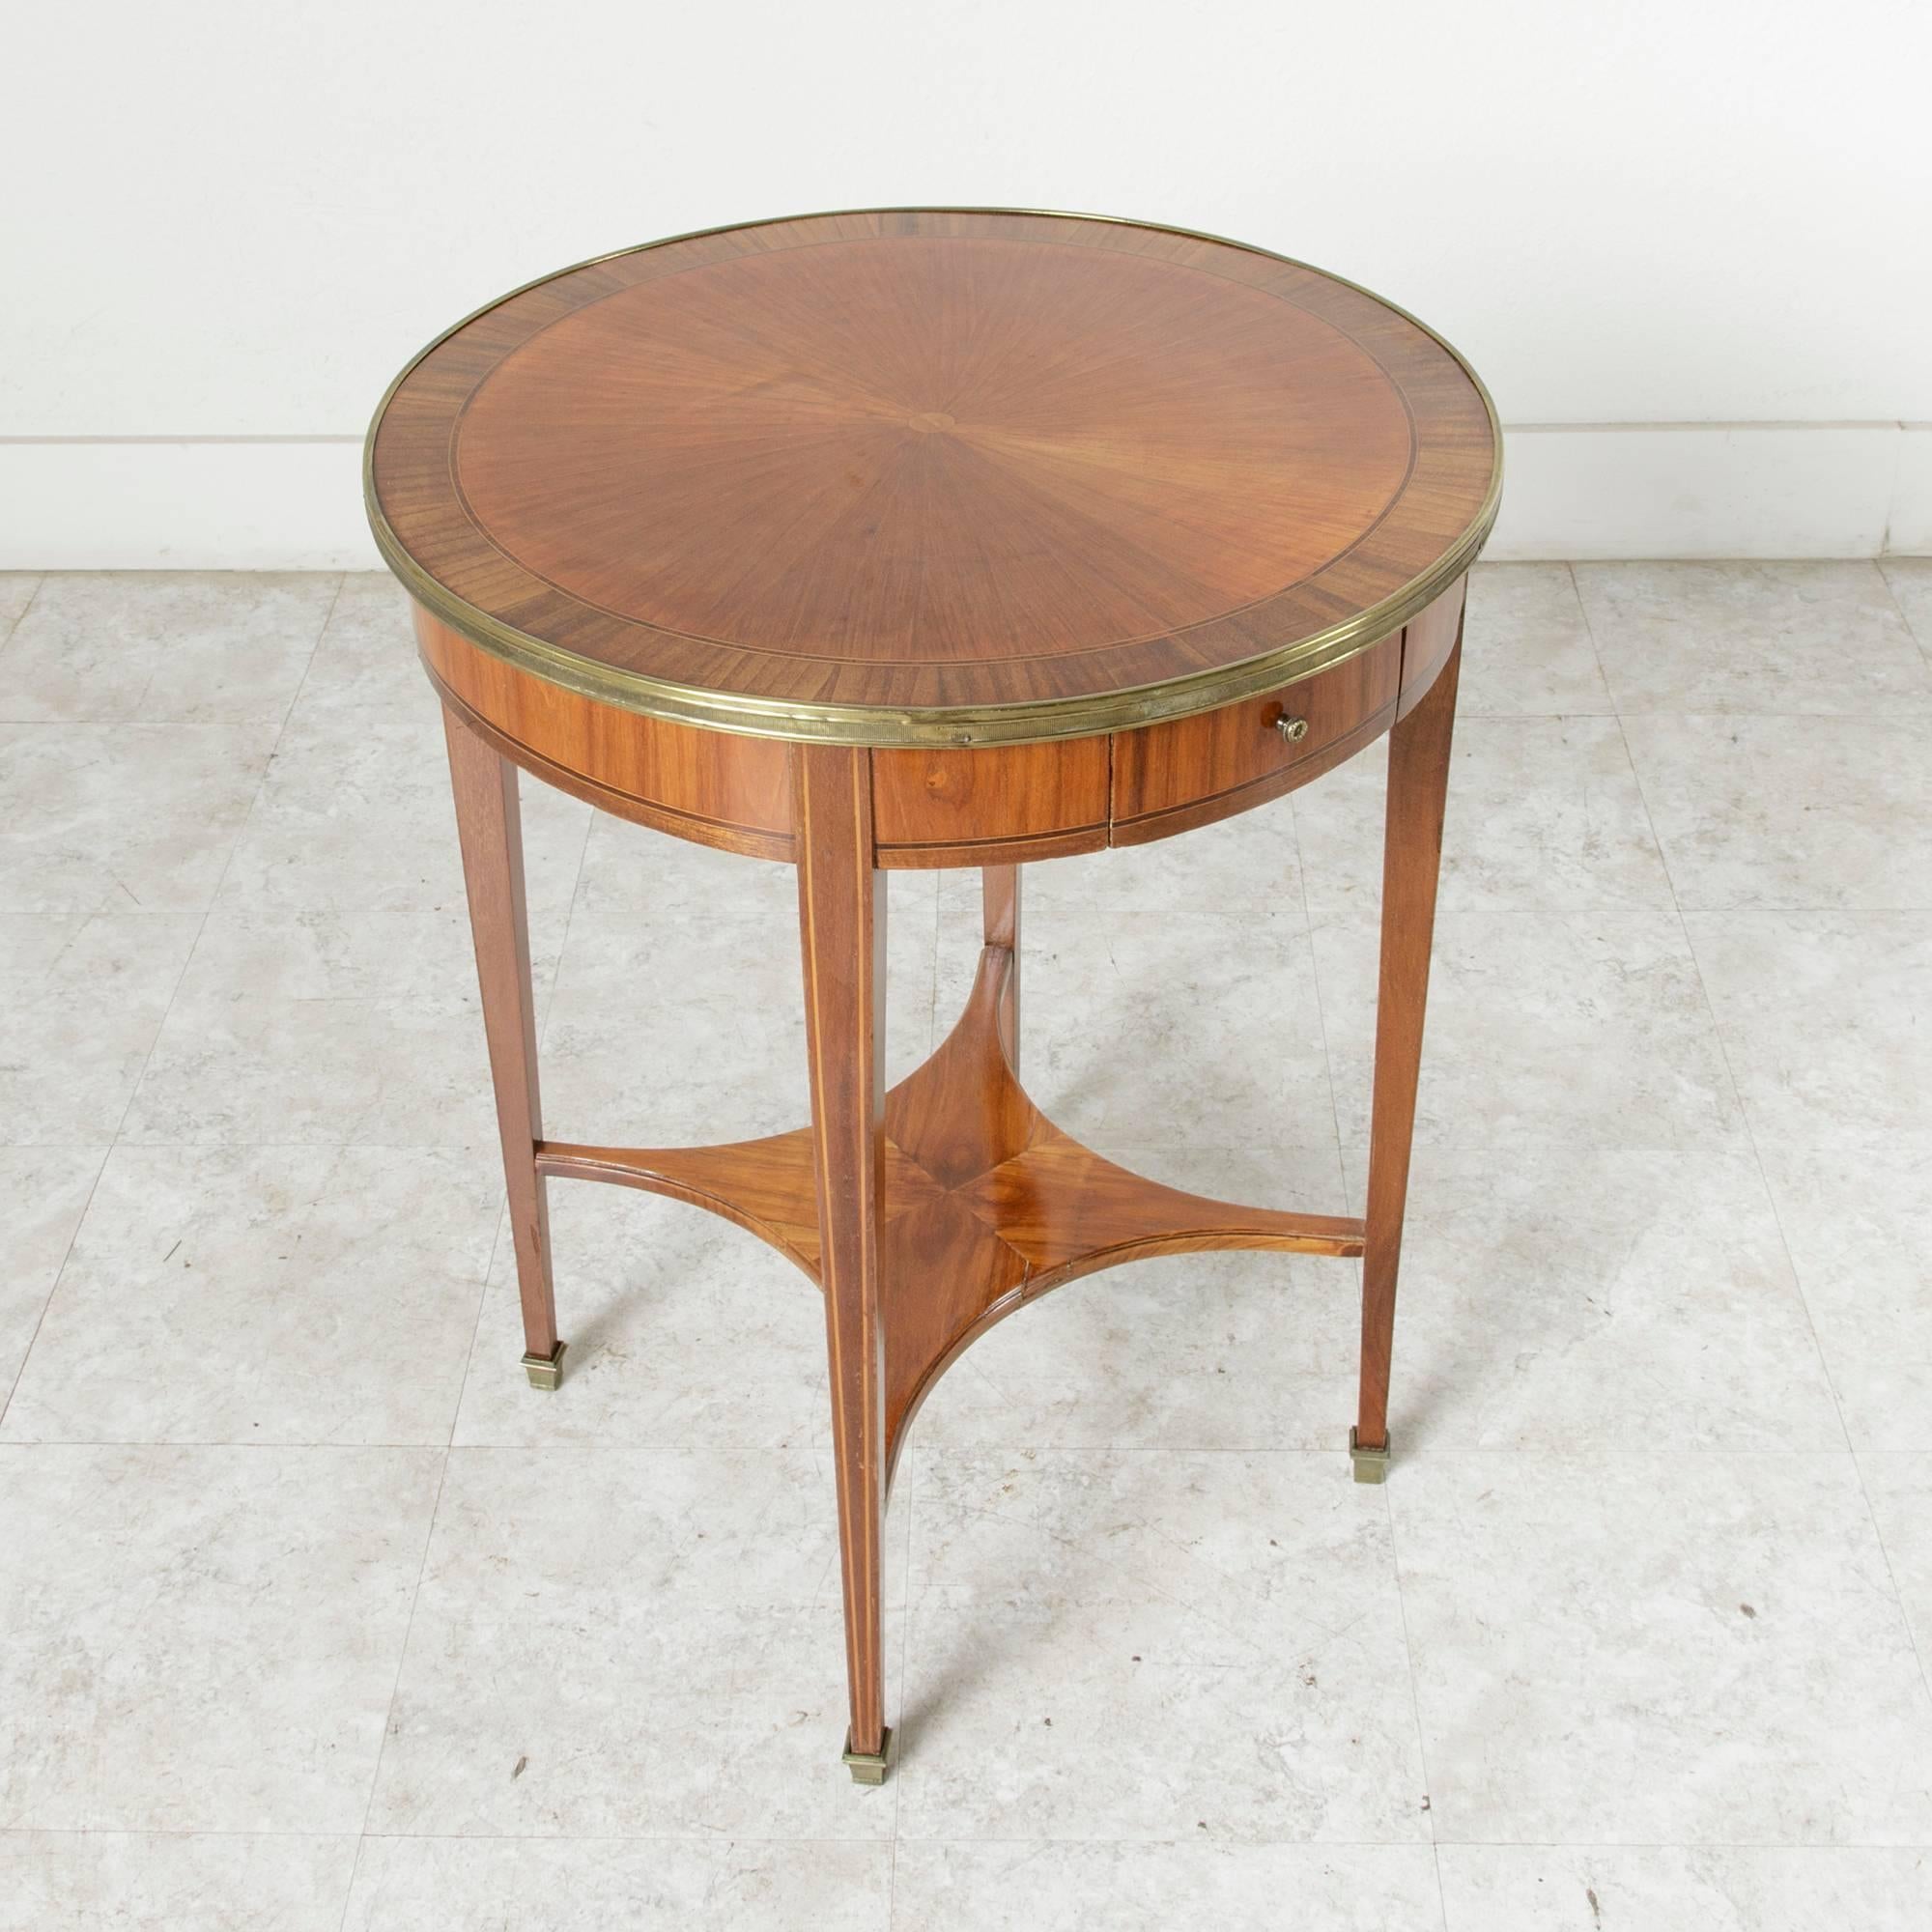 French Art Deco Period Rosewood and Walnut Marquetry Gueridon or Side Table, Brass Trim